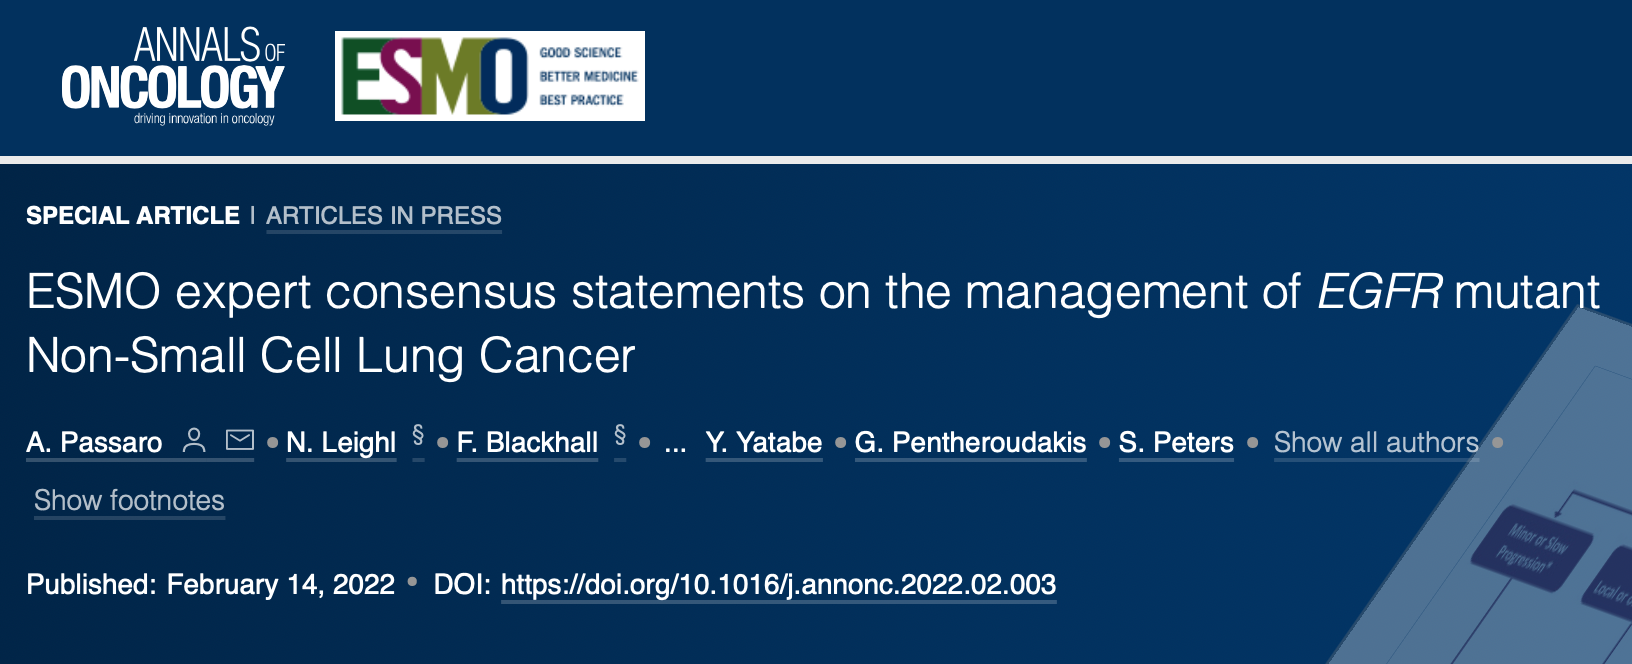 ESMO expert consensus statements on the management of EGFR mutant Non-Small Cell Lung Cancer